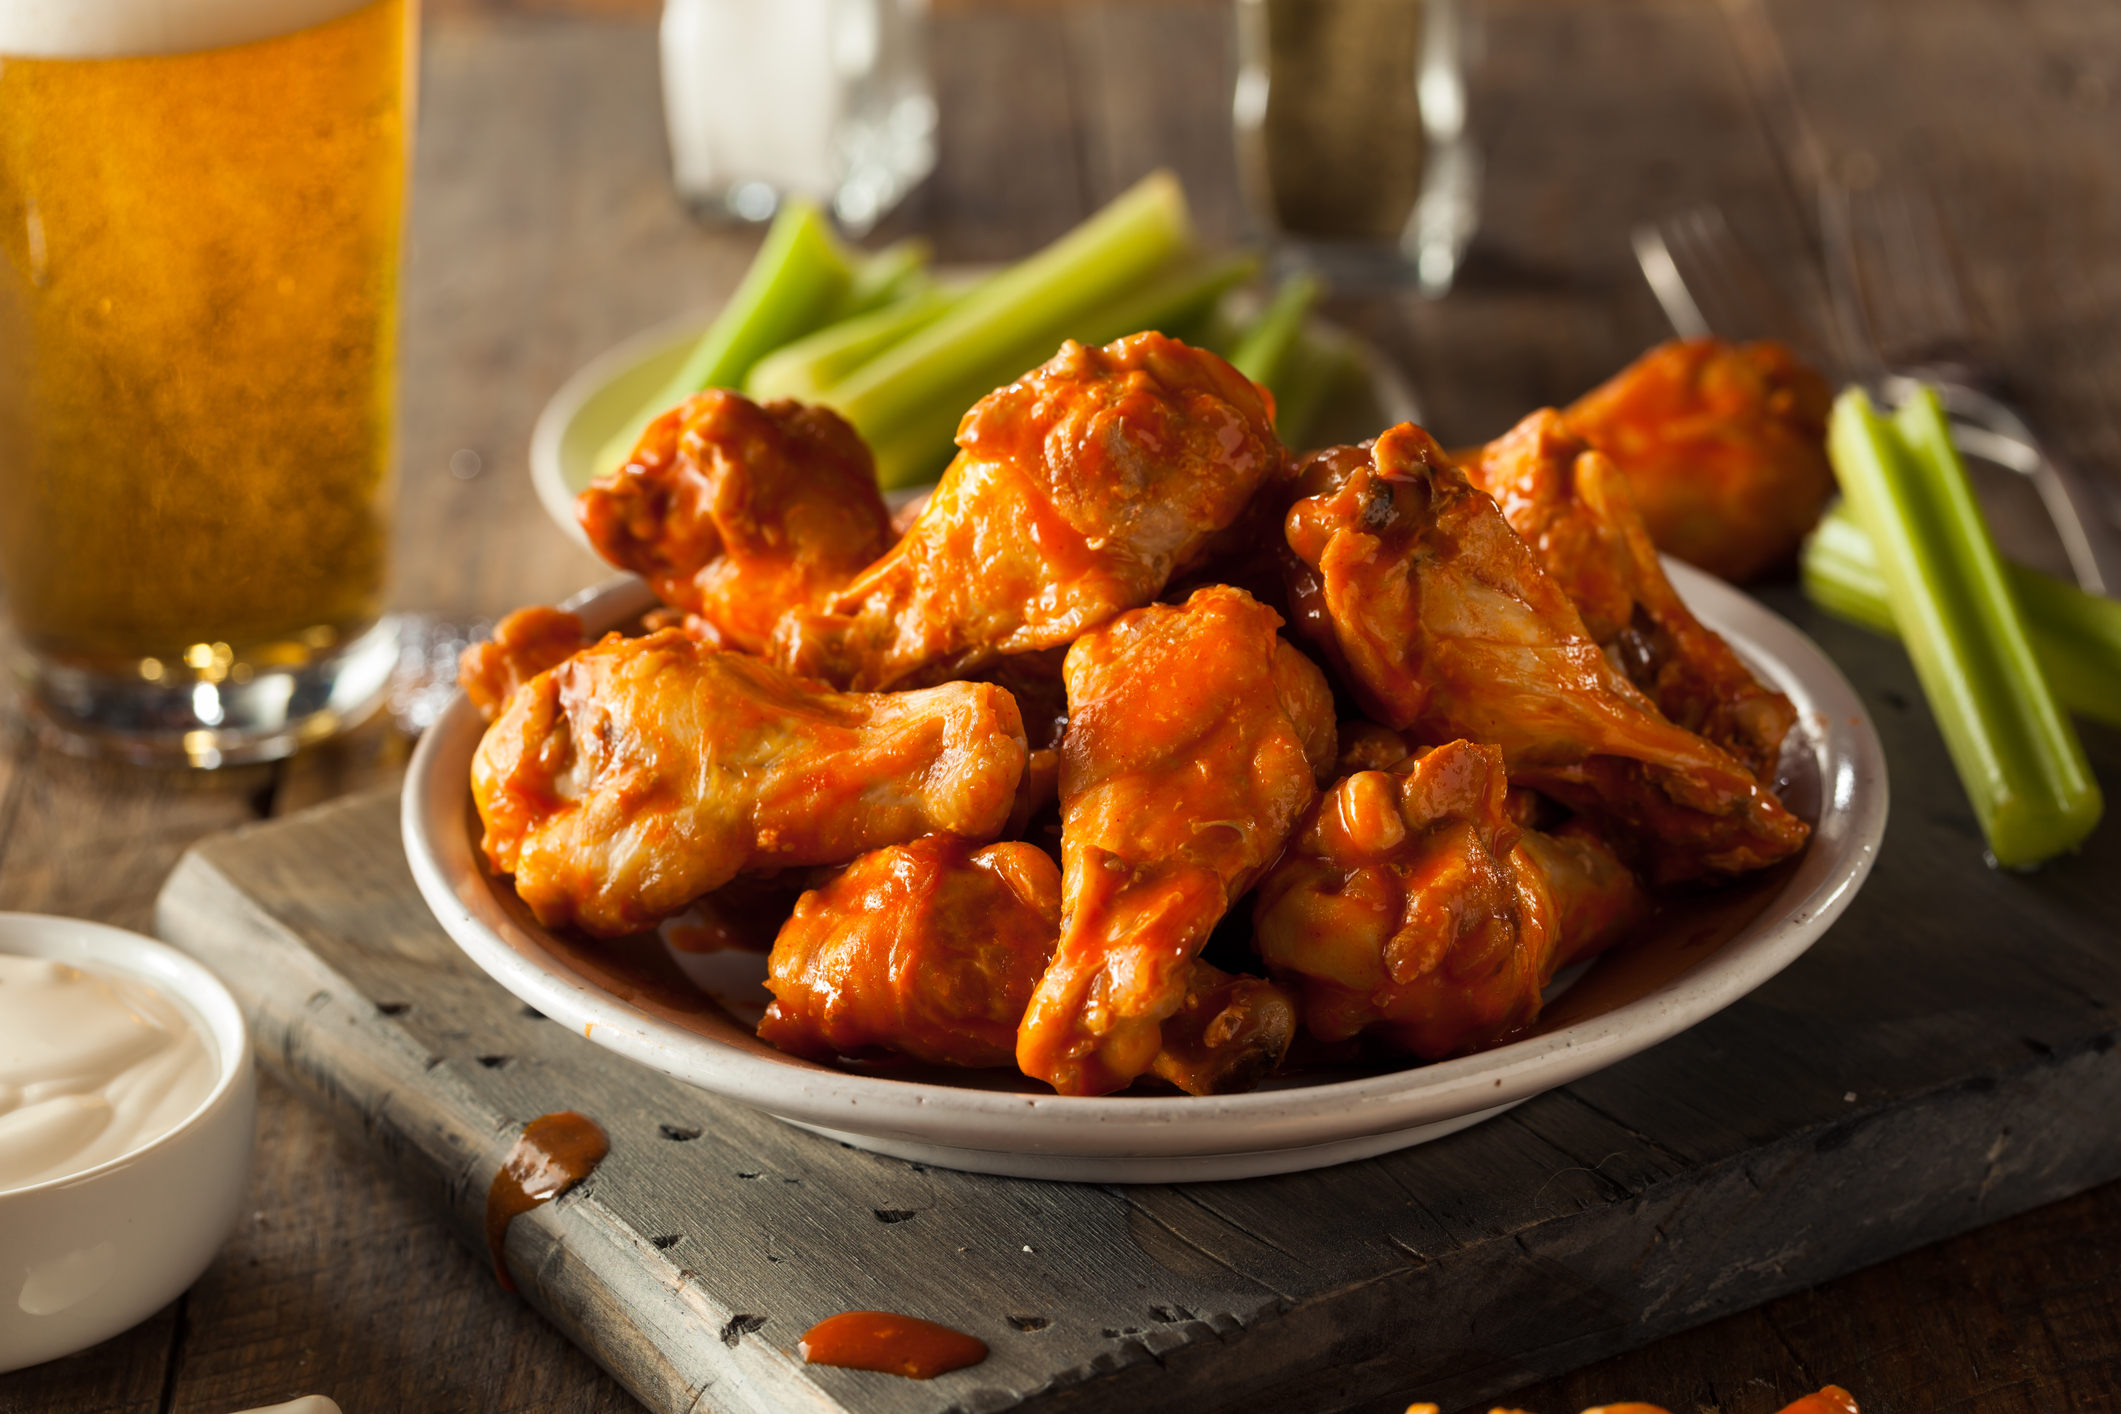 National Chicken Wing Day: 10 places to get free or cheap wings!